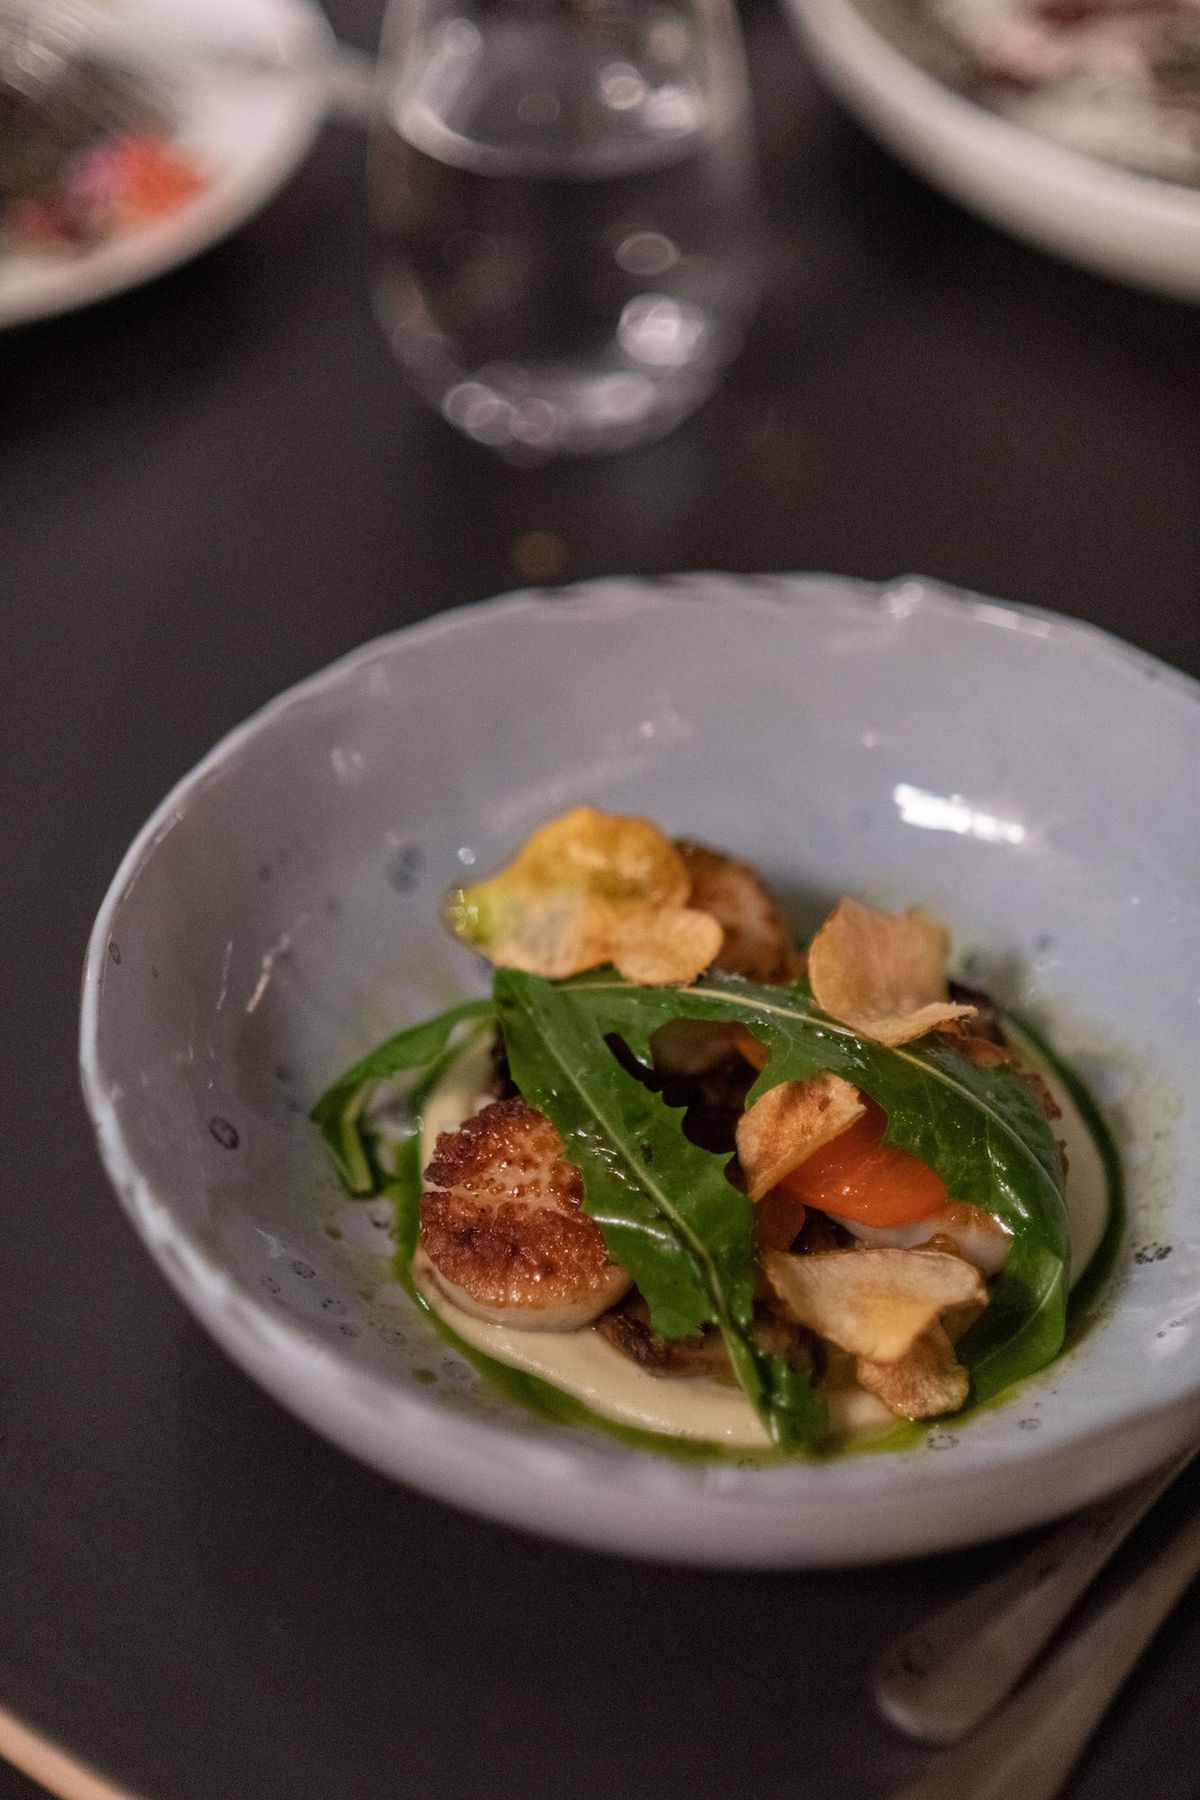 Scallops and greens in a bowl at a dinner restaurant at night.